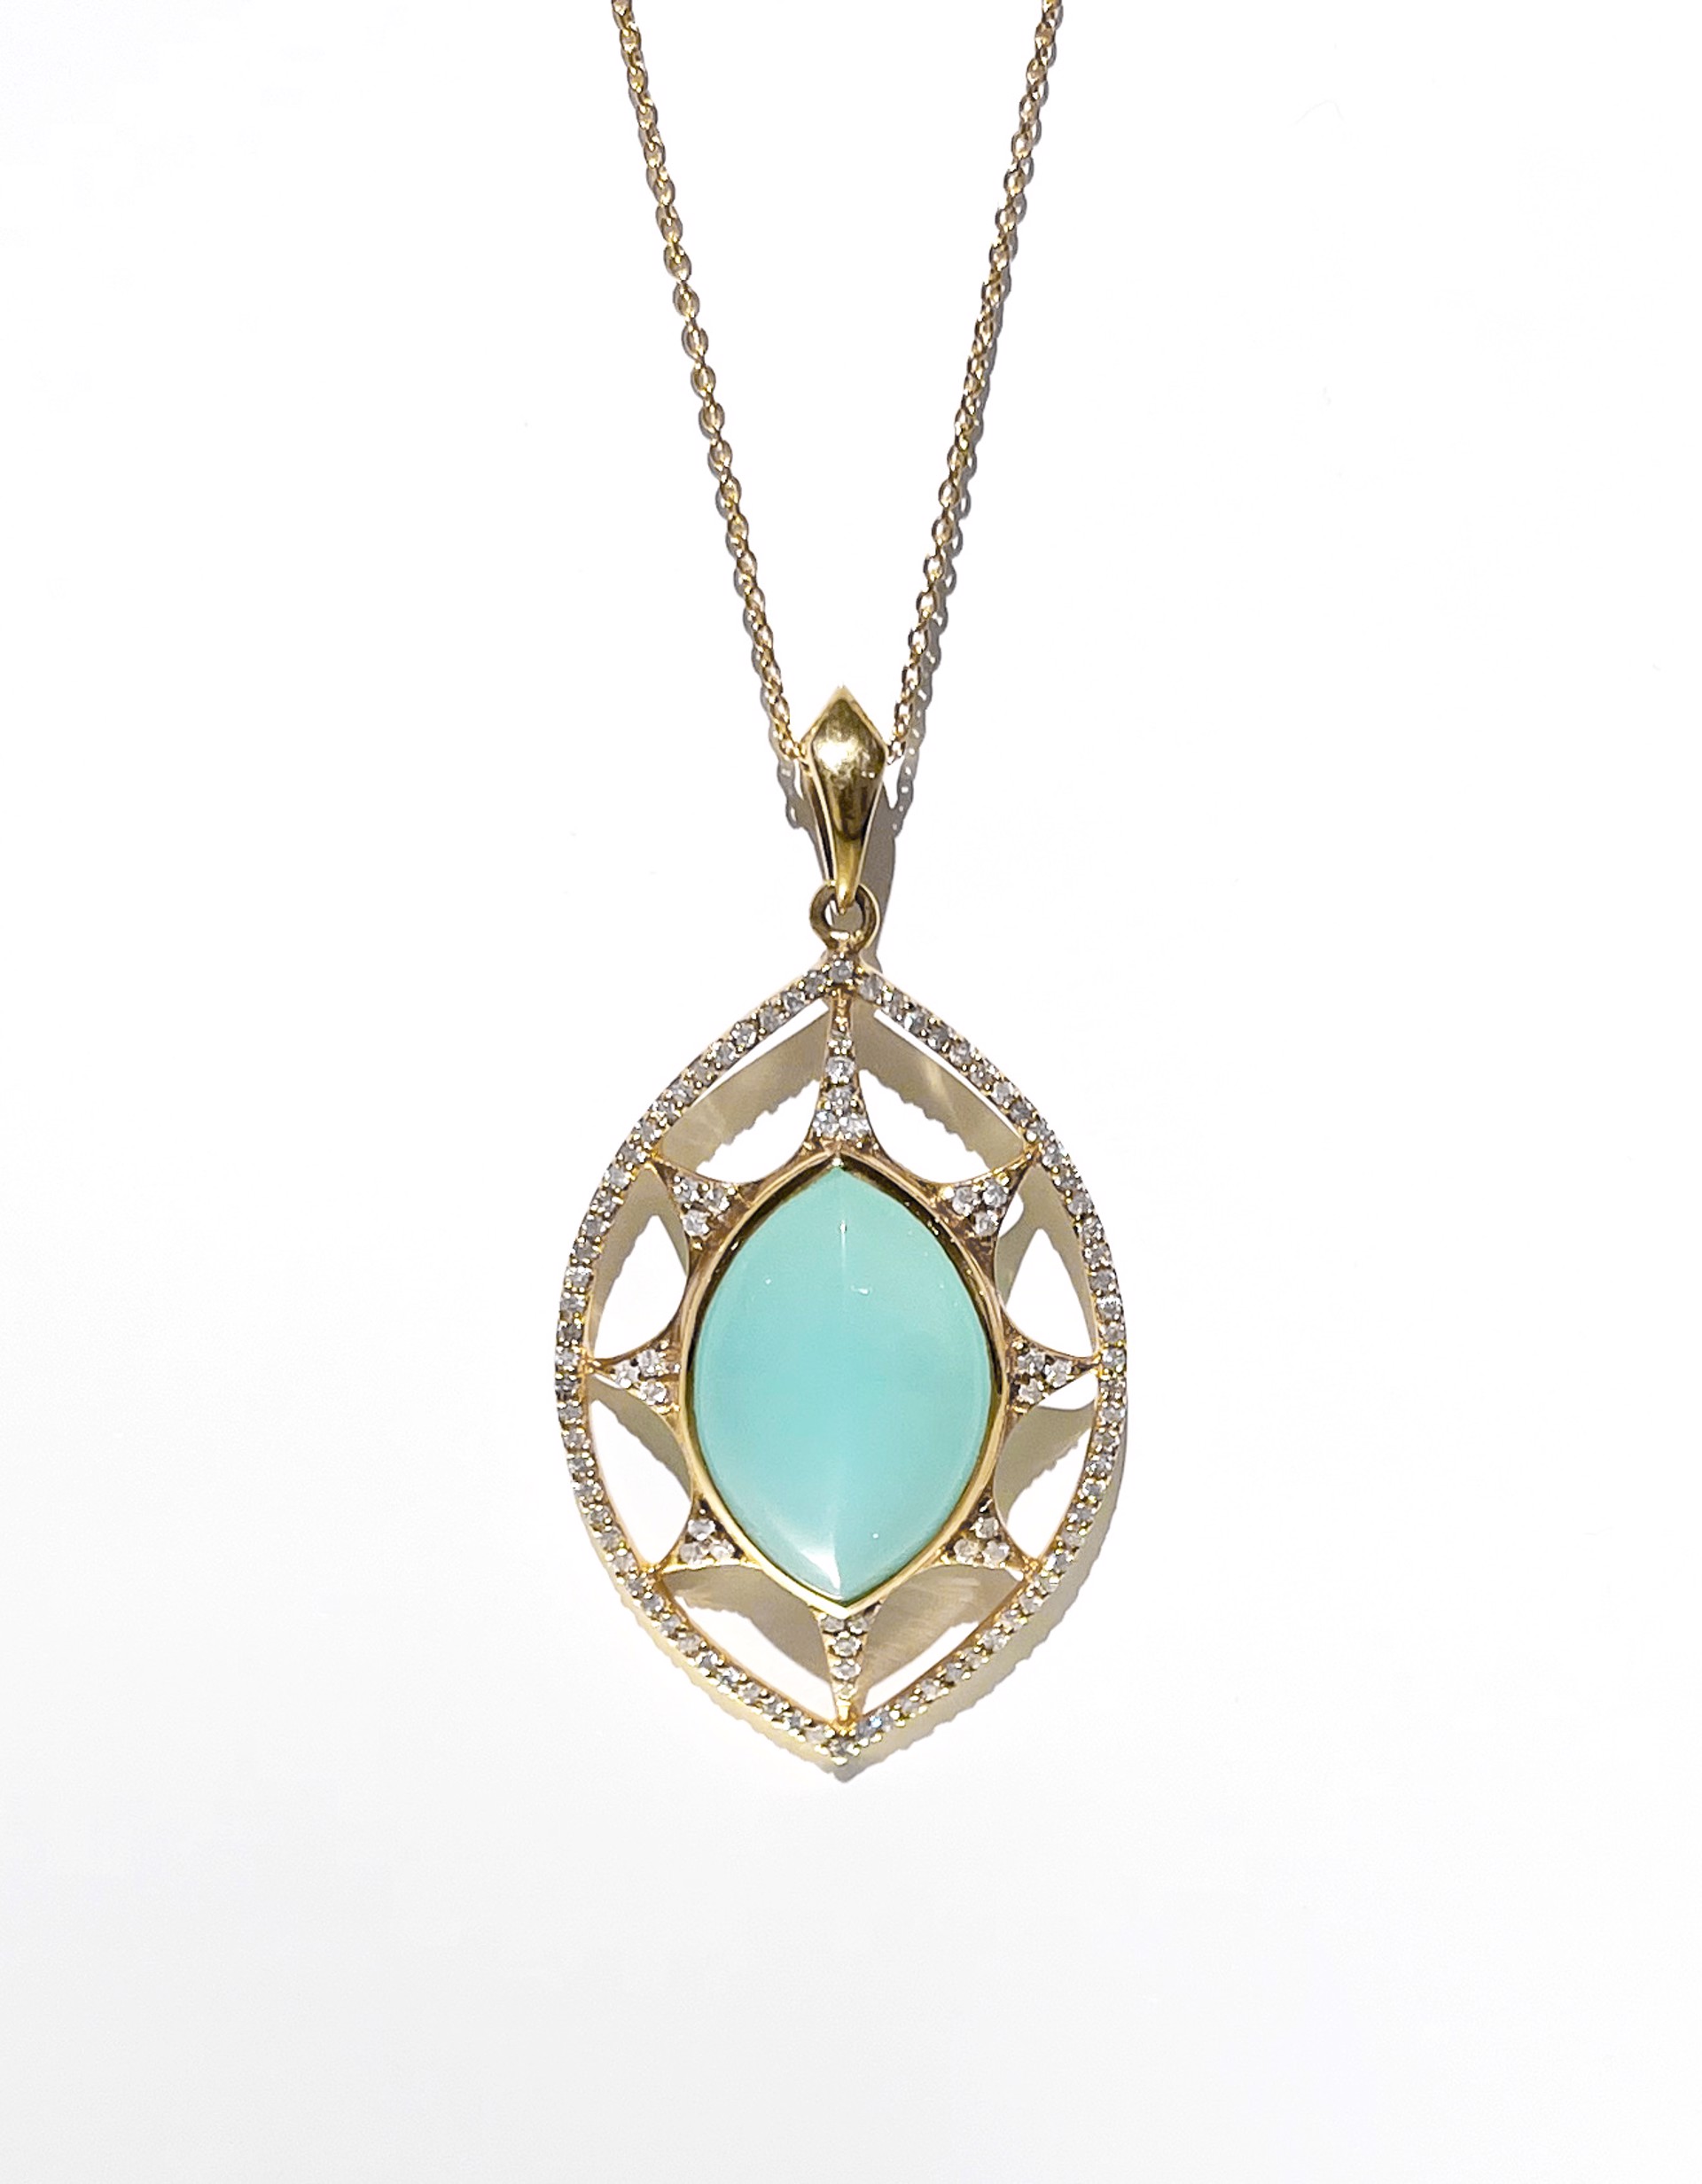 Peruvian Chalcedoney and Diamond Pave Necklace by Lauren Harper